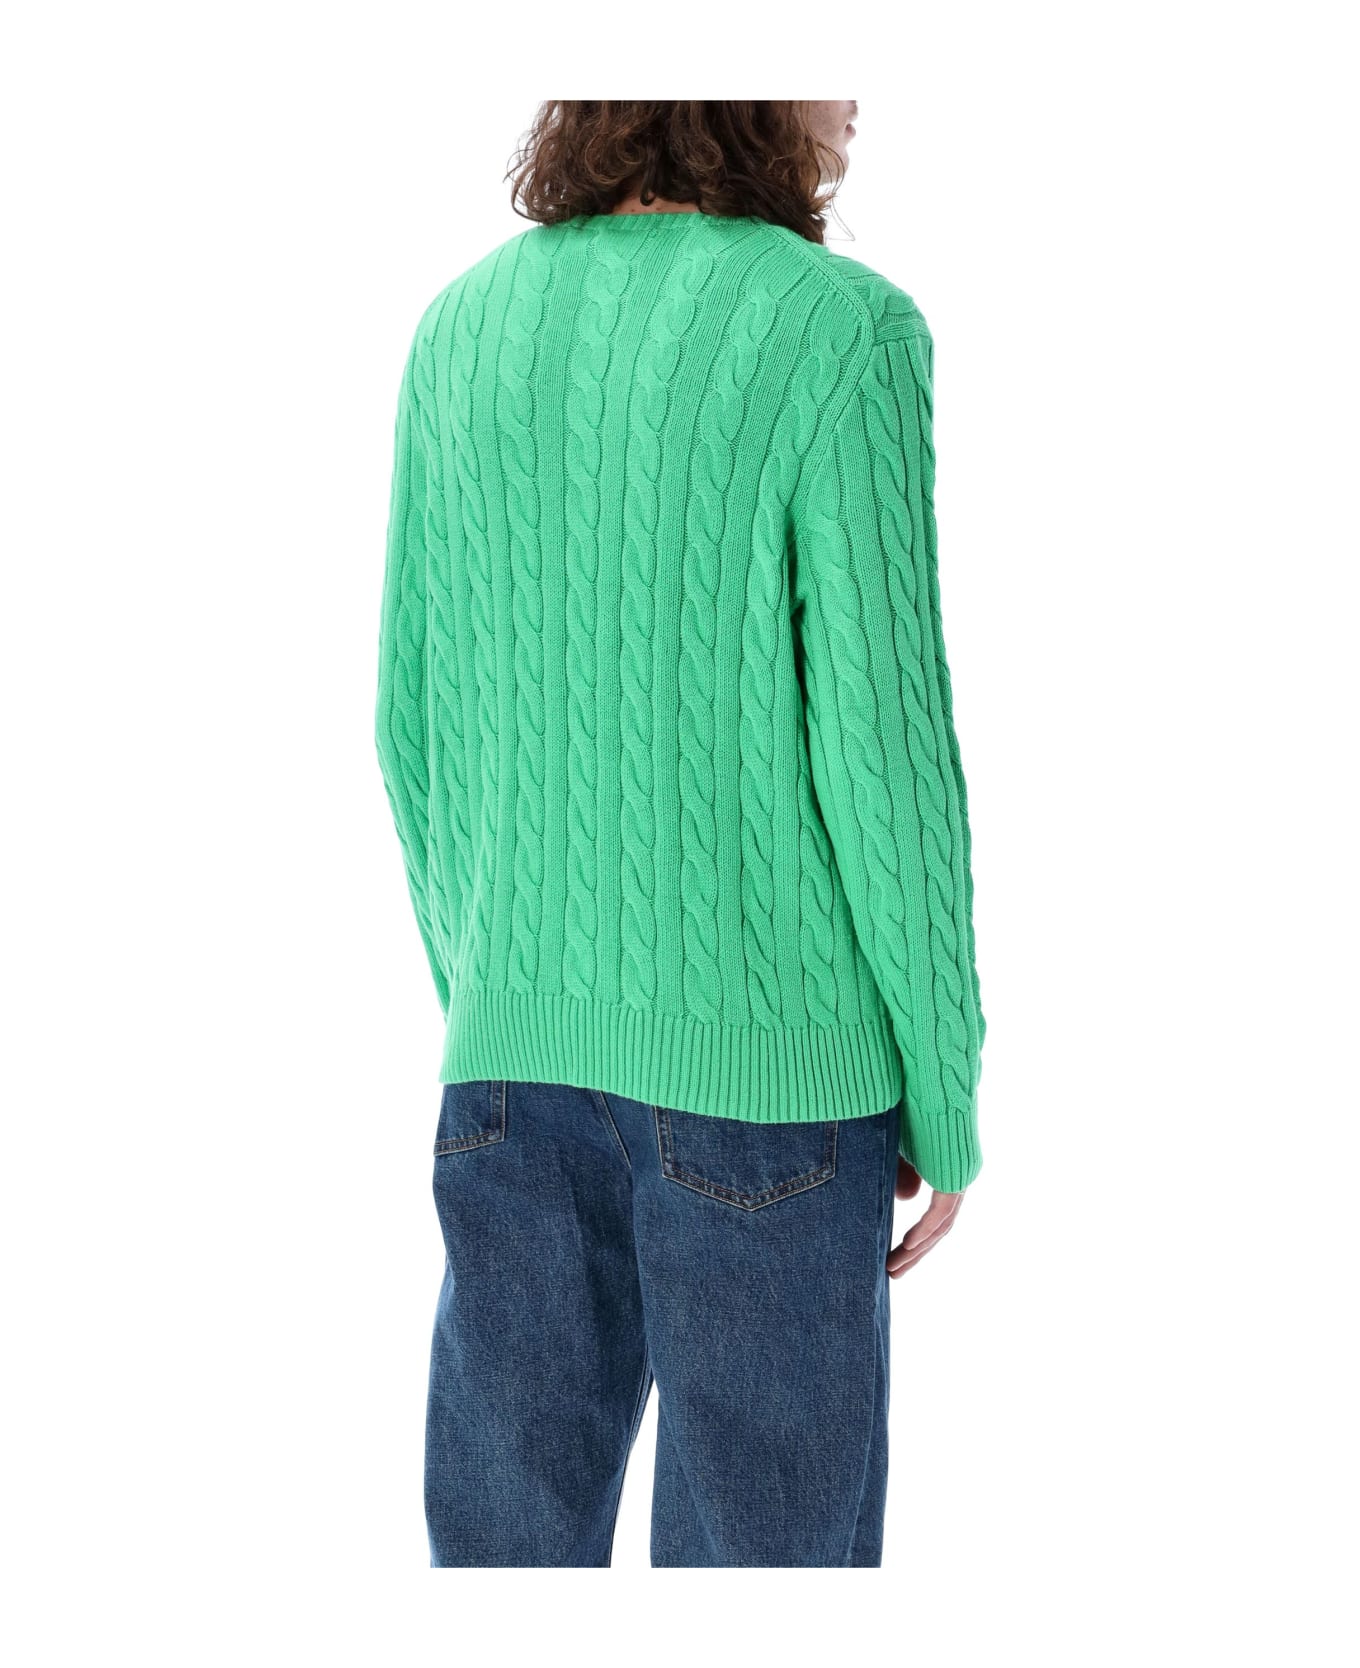 Polo Ralph Lauren Cable Knit Sweater - GREEN